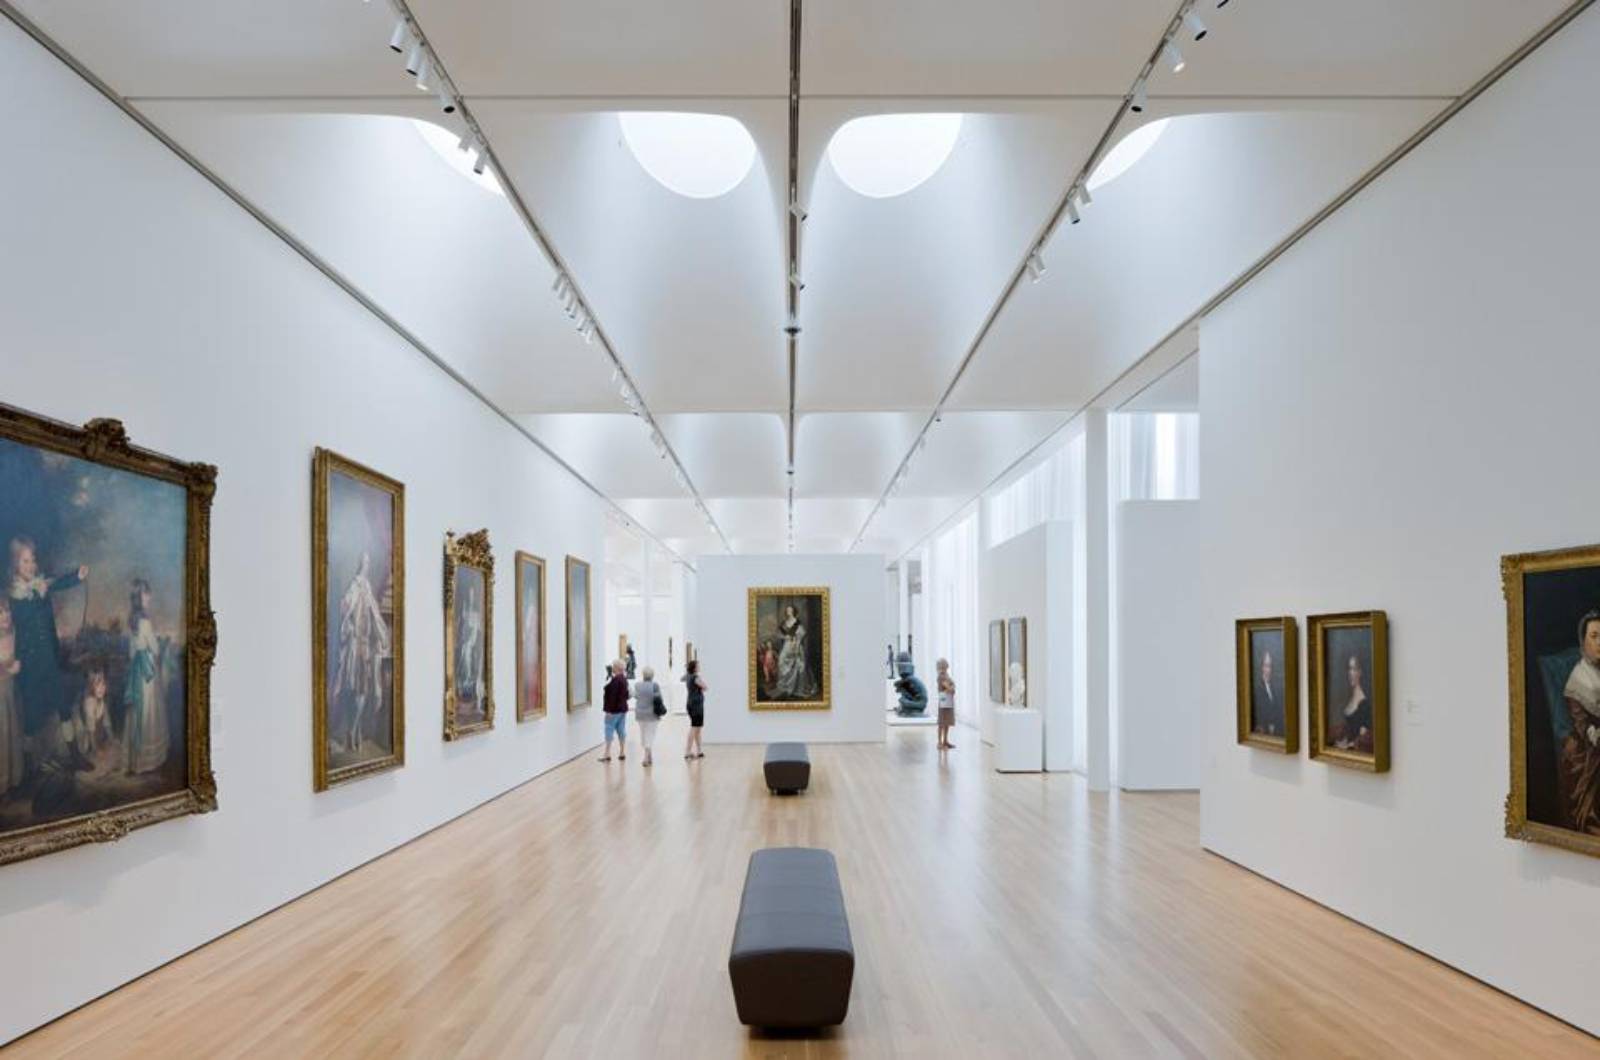 NORTH CAROLINA MUSEUM OF ART BY THOMAS PHIFER AND PARTNERS | A As Architecture1600 x 1060